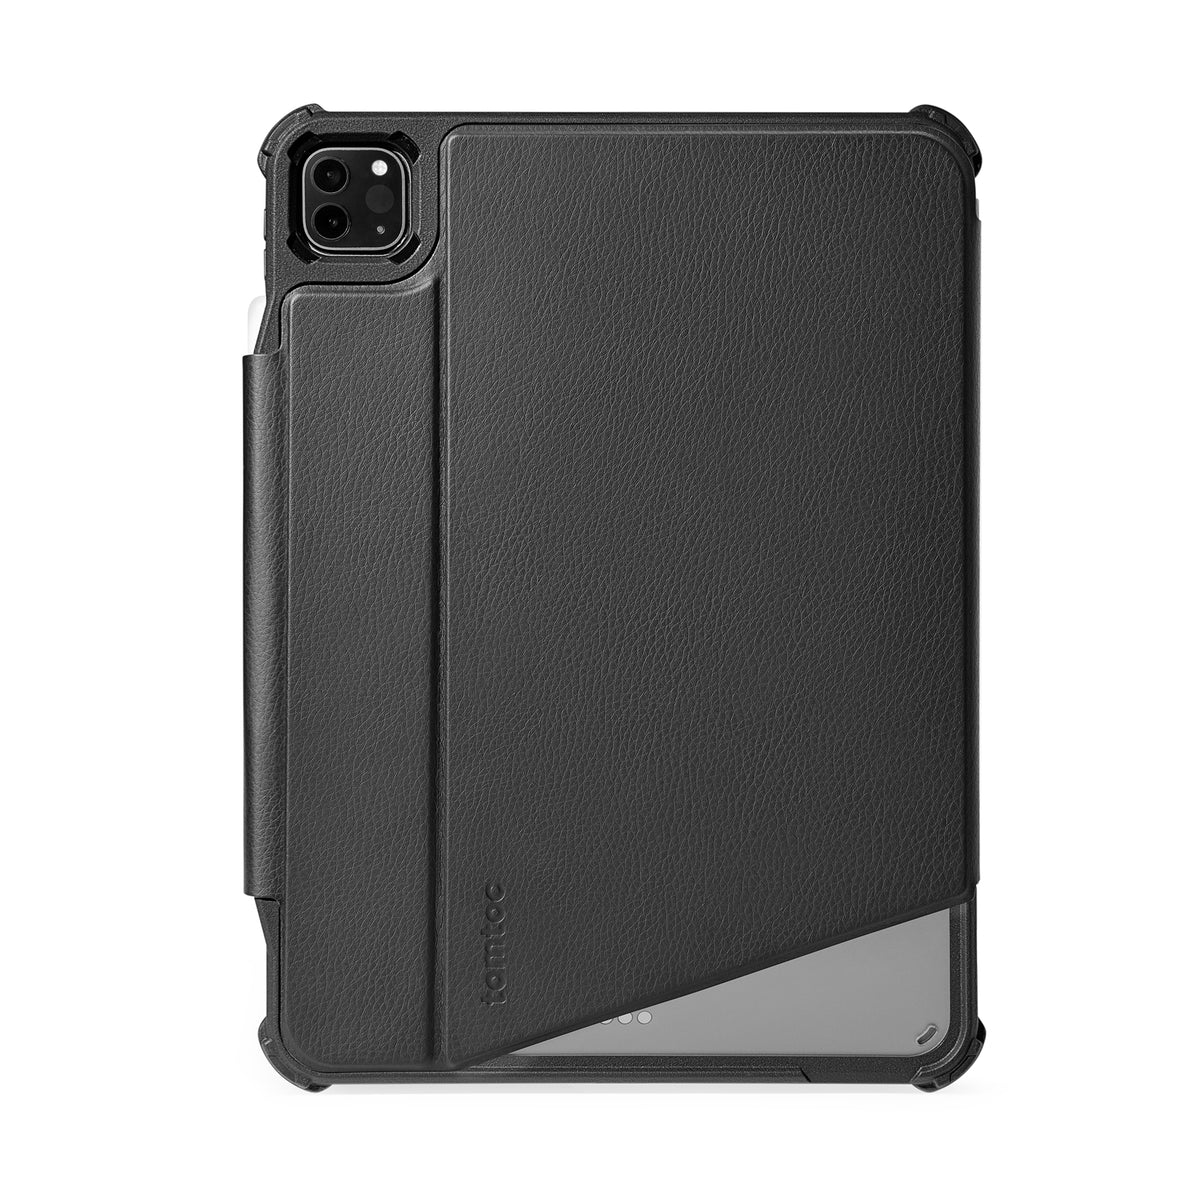 tomtoc 11 Inch iPad Pro Wireless Apple Pencil Charging / Detachable Protective Case - Leather Black